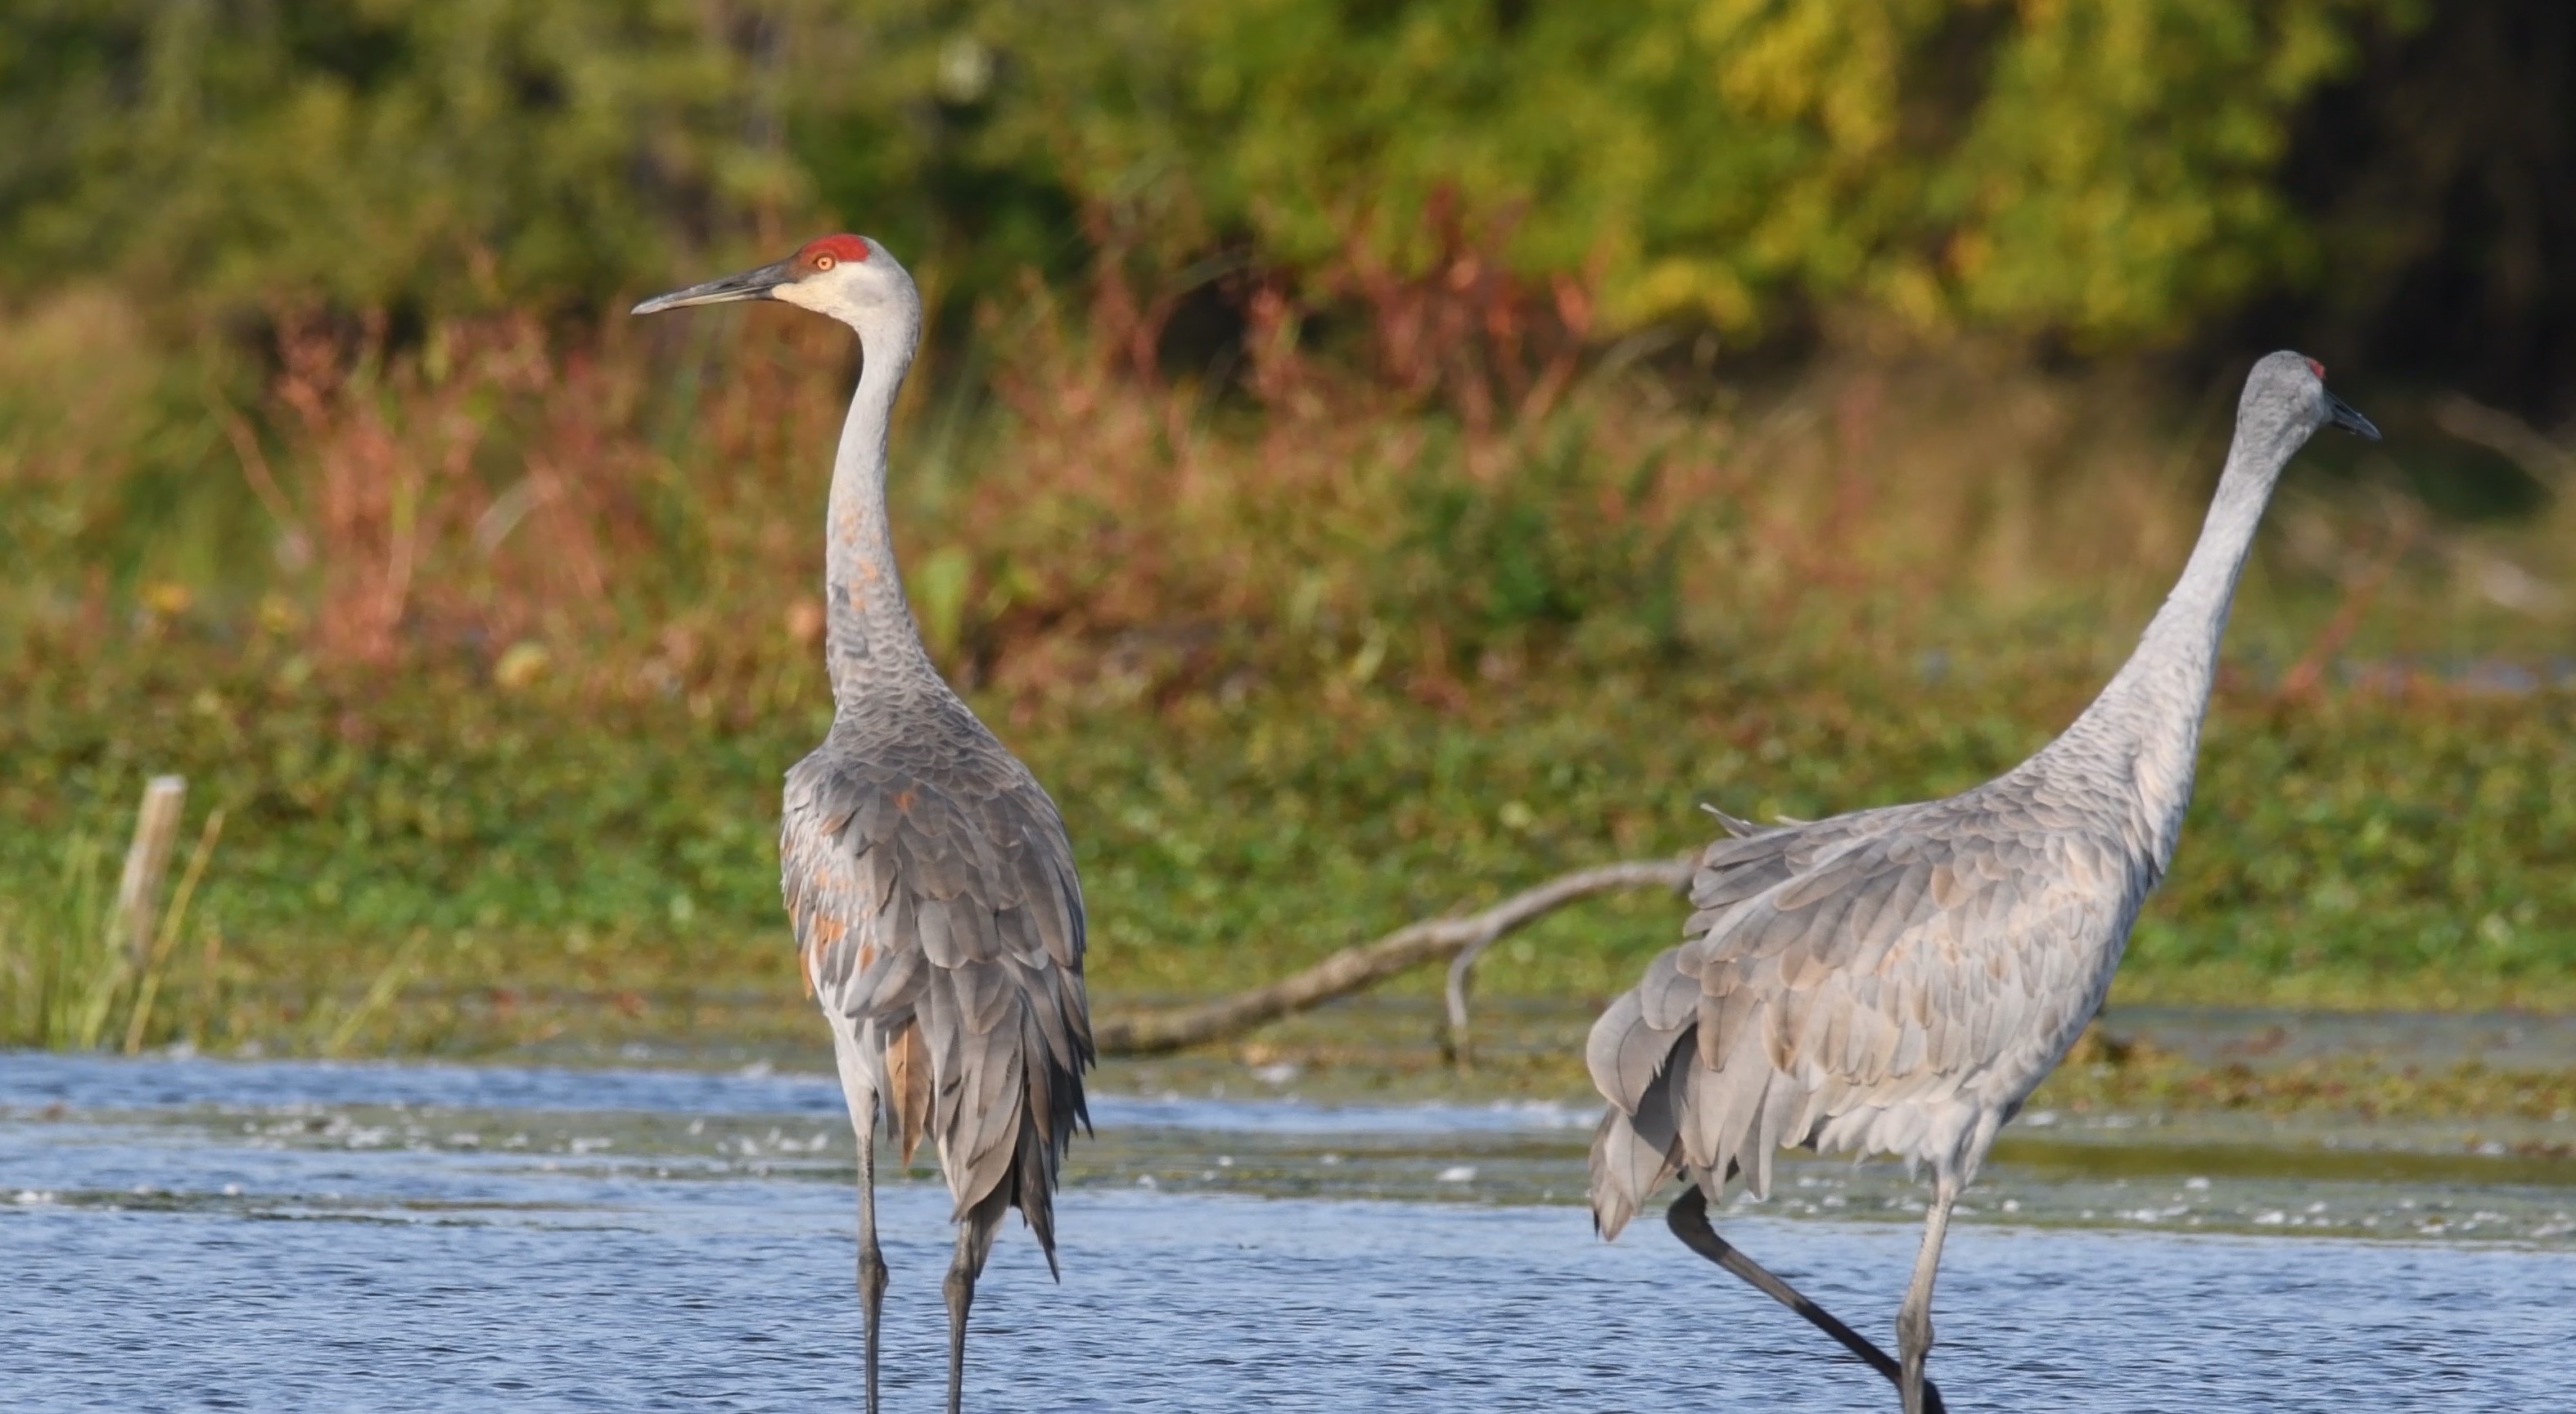 Two sandhill cranes standing in the water.